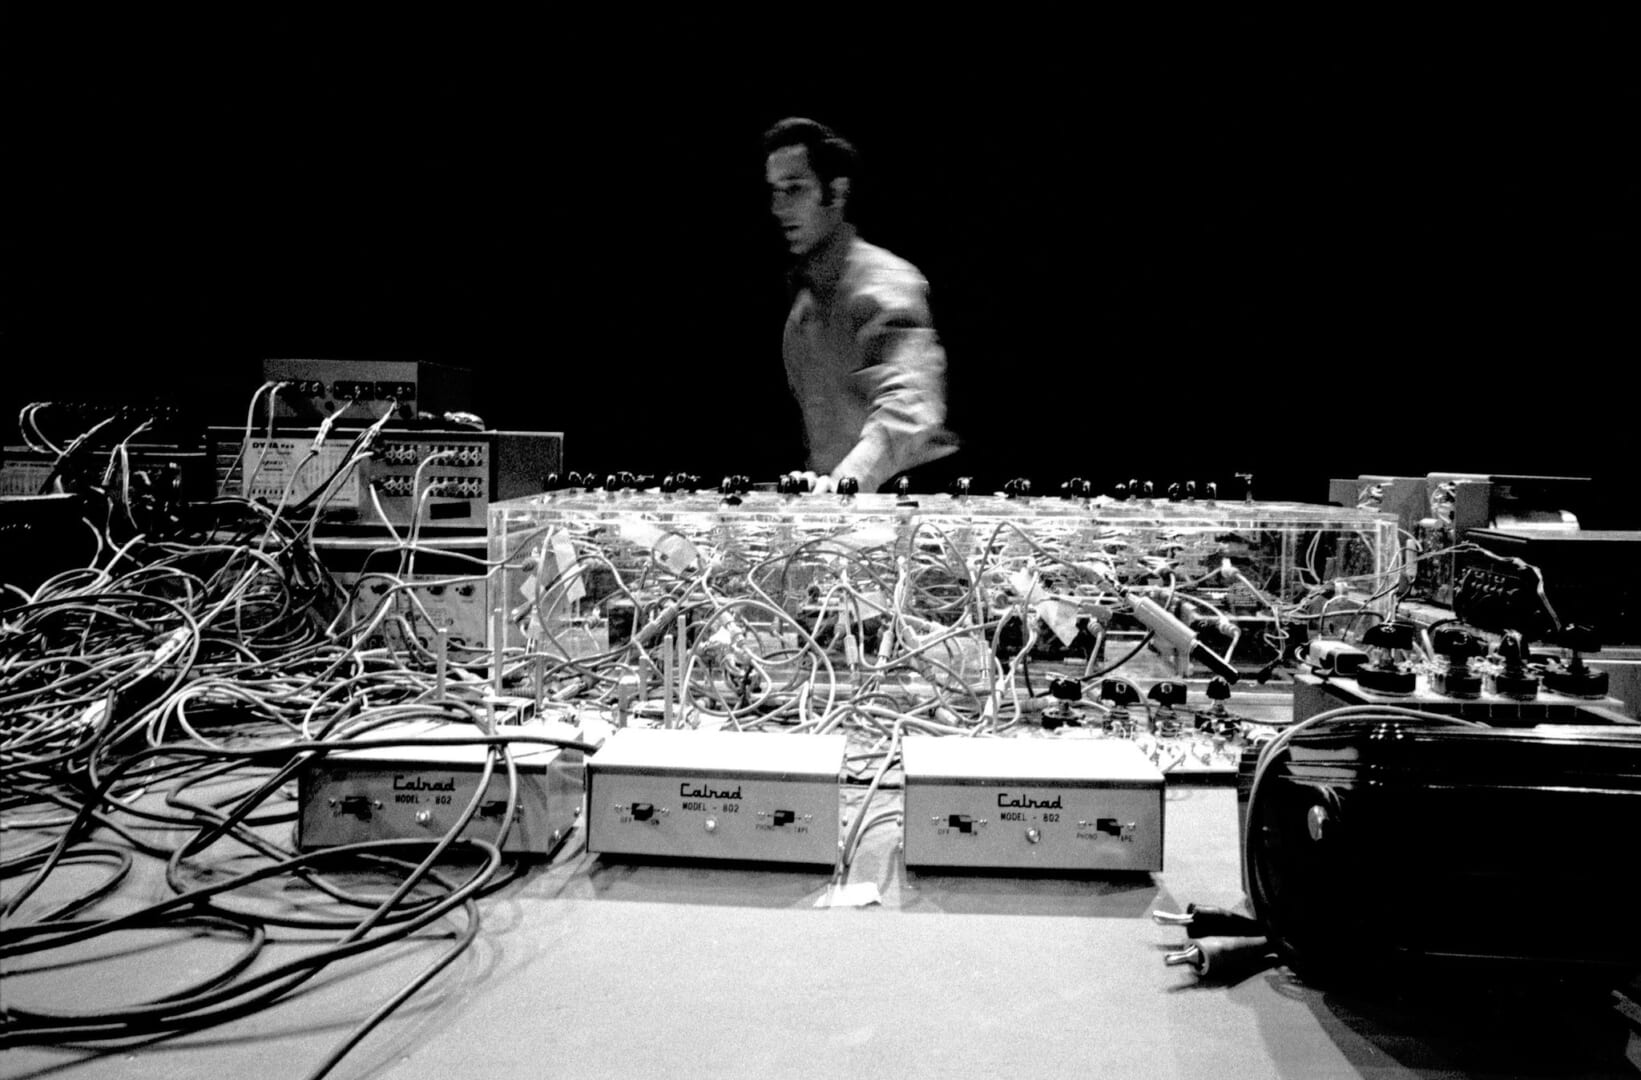 I don't have a caption, I just thought Steve Reich looked cool in this pic.